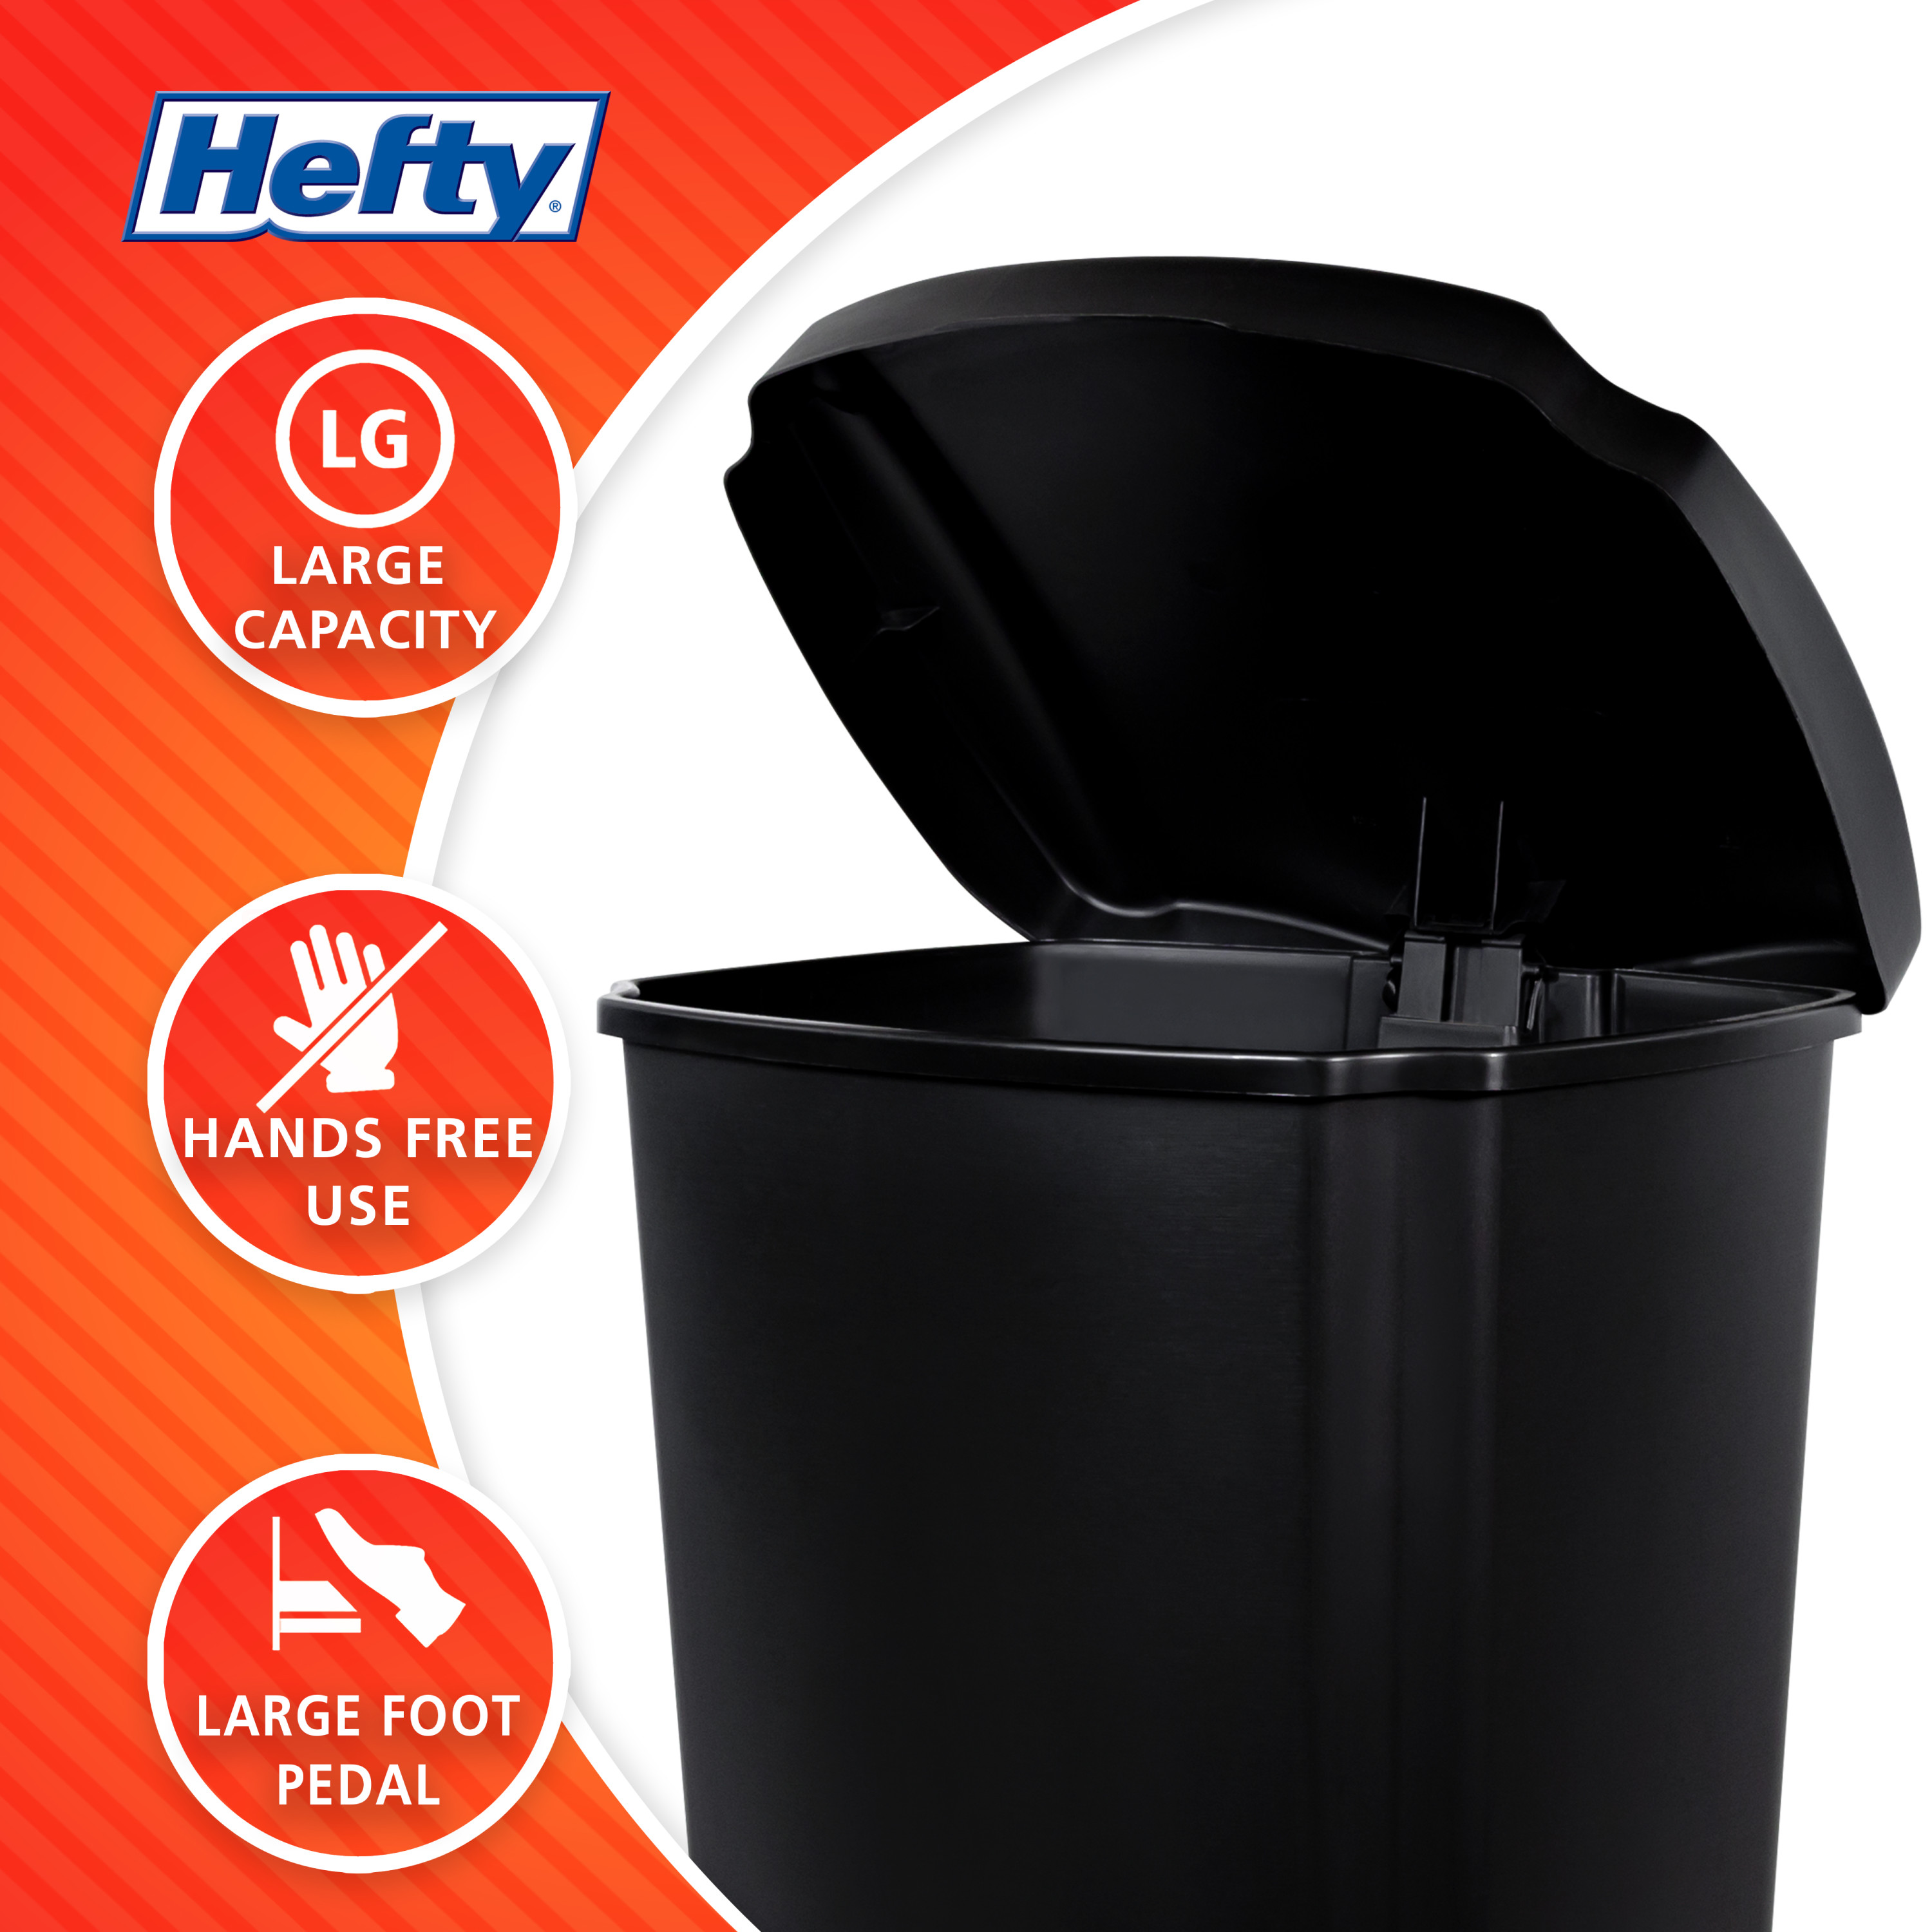 Hefty 12.1 Gallon Trash Can, Plastic Step On Kitchen Trash Can, Black - image 2 of 8